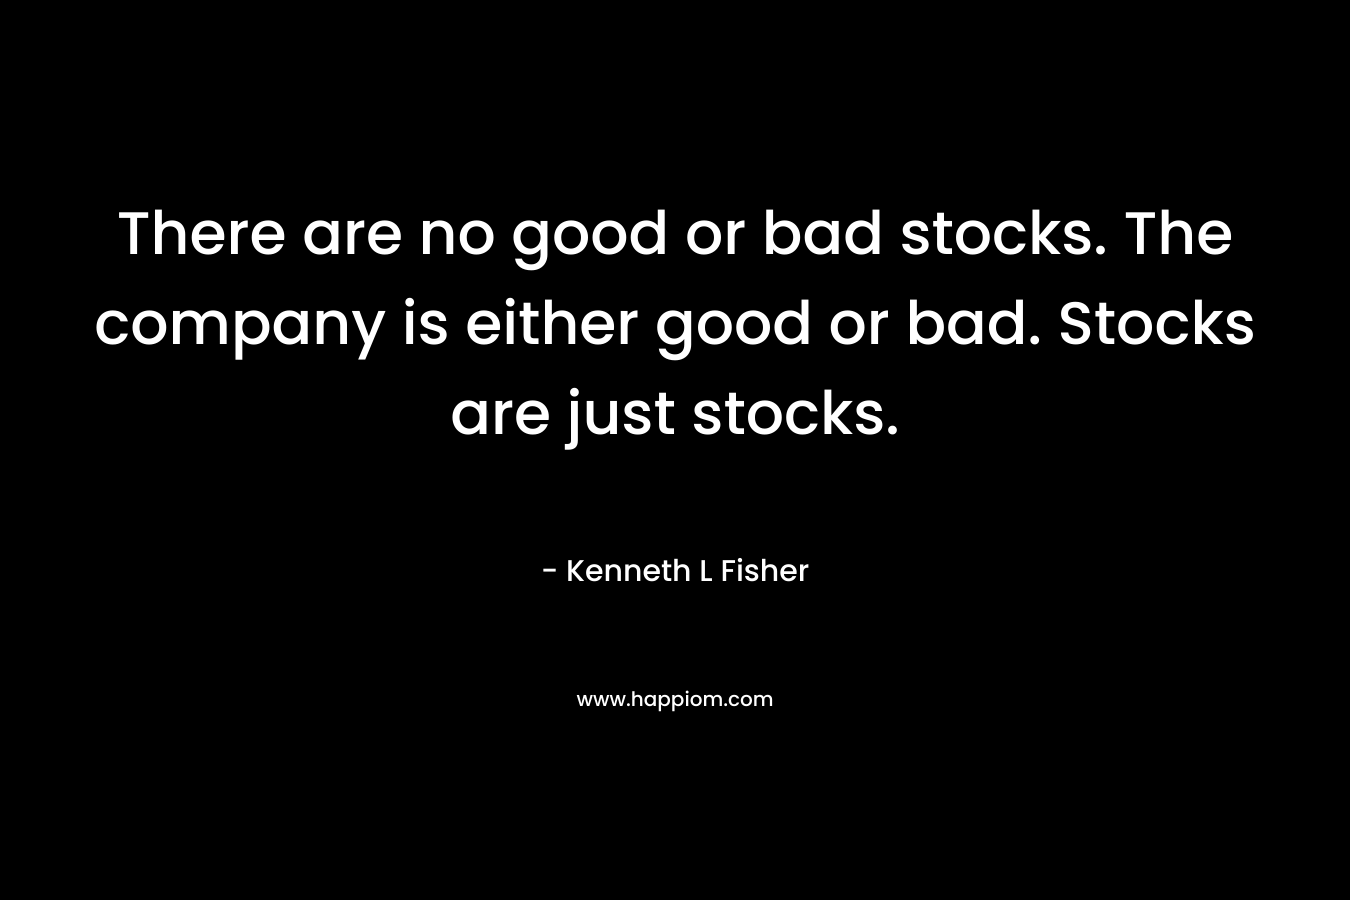 There are no good or bad stocks. The company is either good or bad. Stocks are just stocks. – Kenneth L Fisher